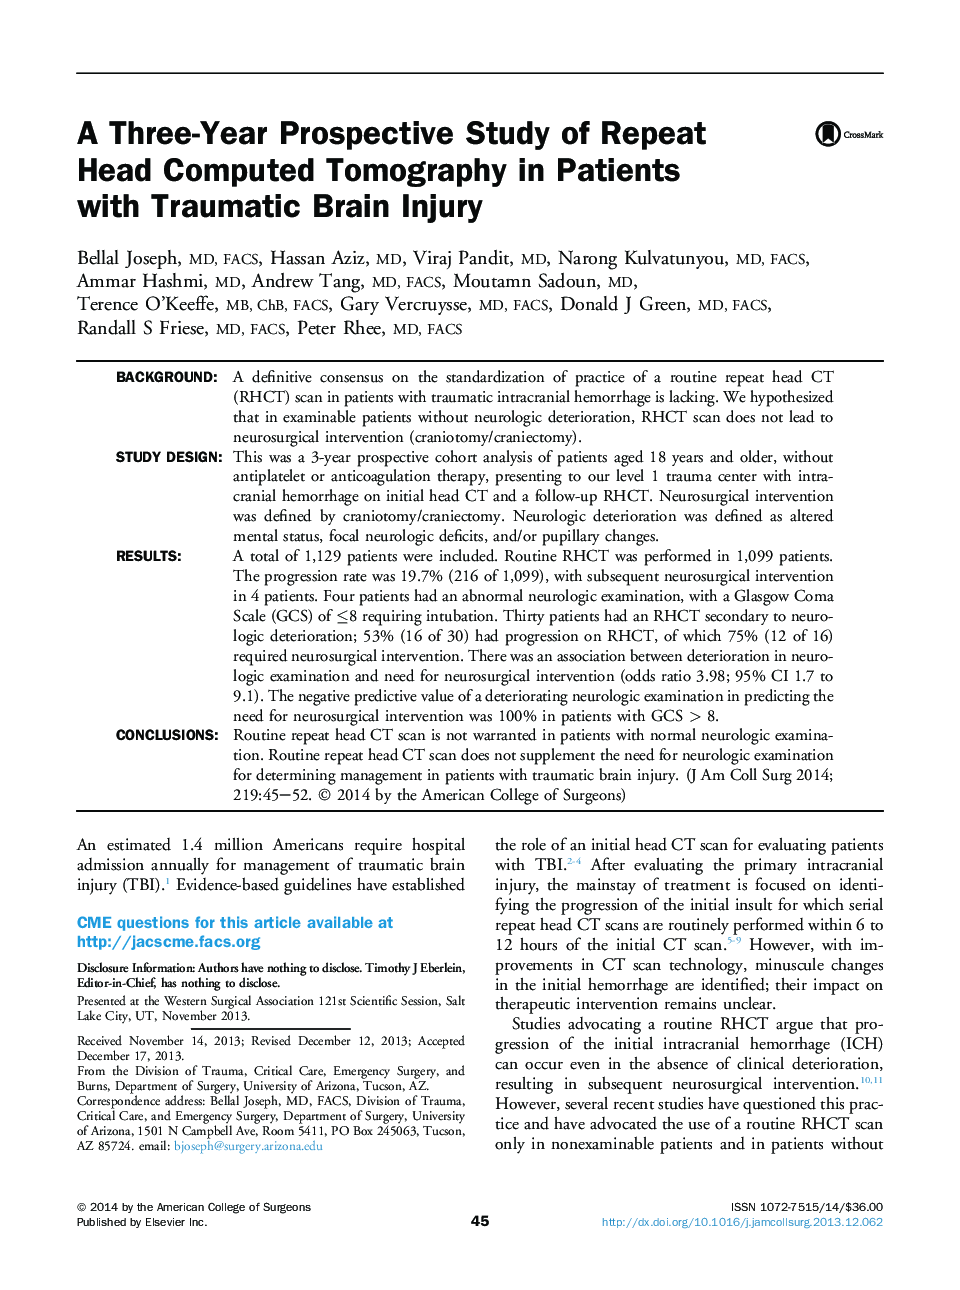 A Three-Year Prospective Study of Repeat Head Computed Tomography in Patients with Traumatic Brain Injury 